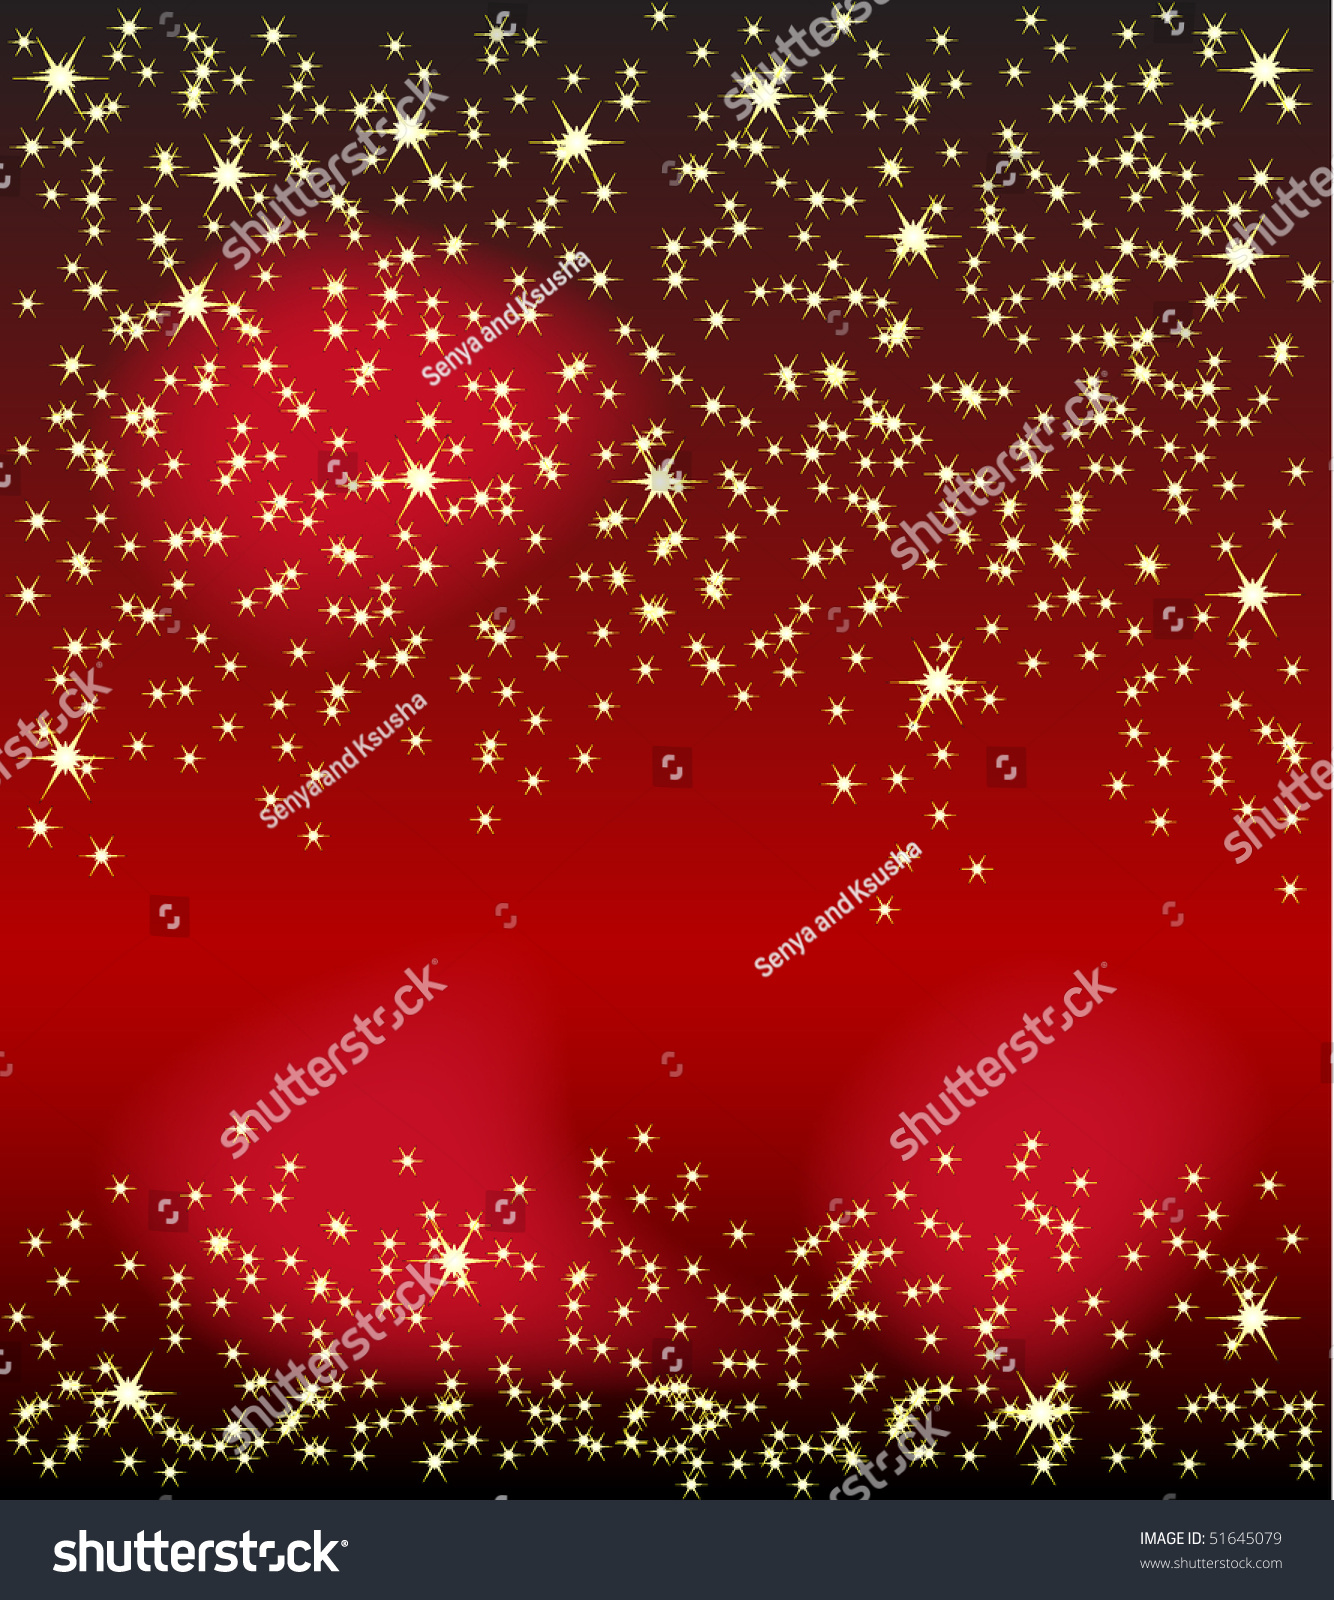 Vector. Colored Falling Down Stars Background Template. - 51645079 ...